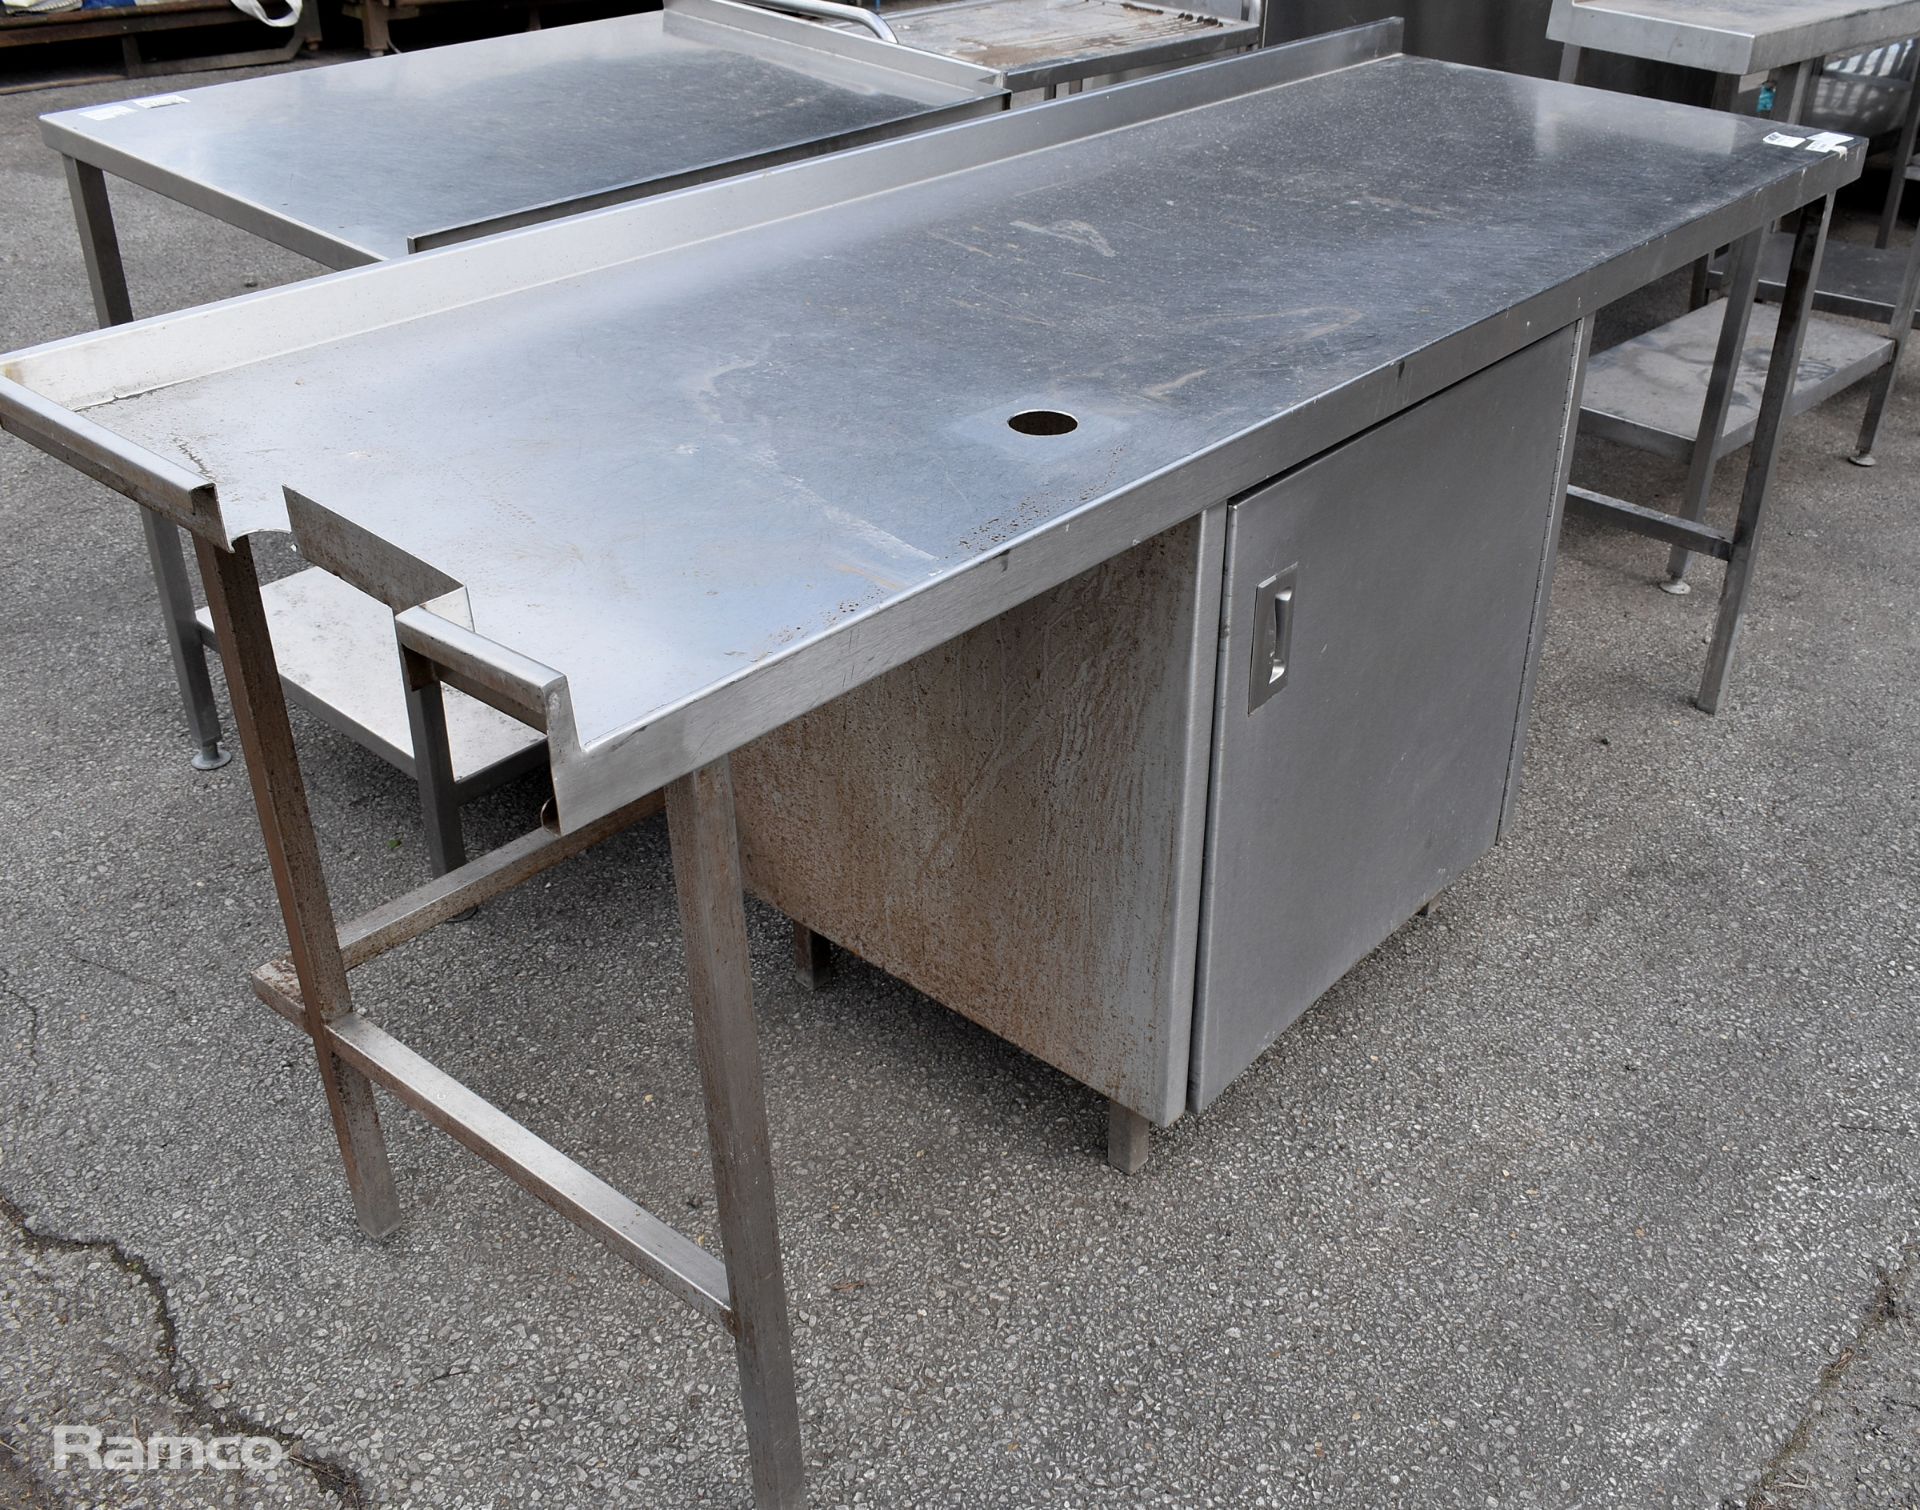 Stainless steel work surface with under counter cupboard - W 2000 x D 700 x H 830mm - Image 2 of 4